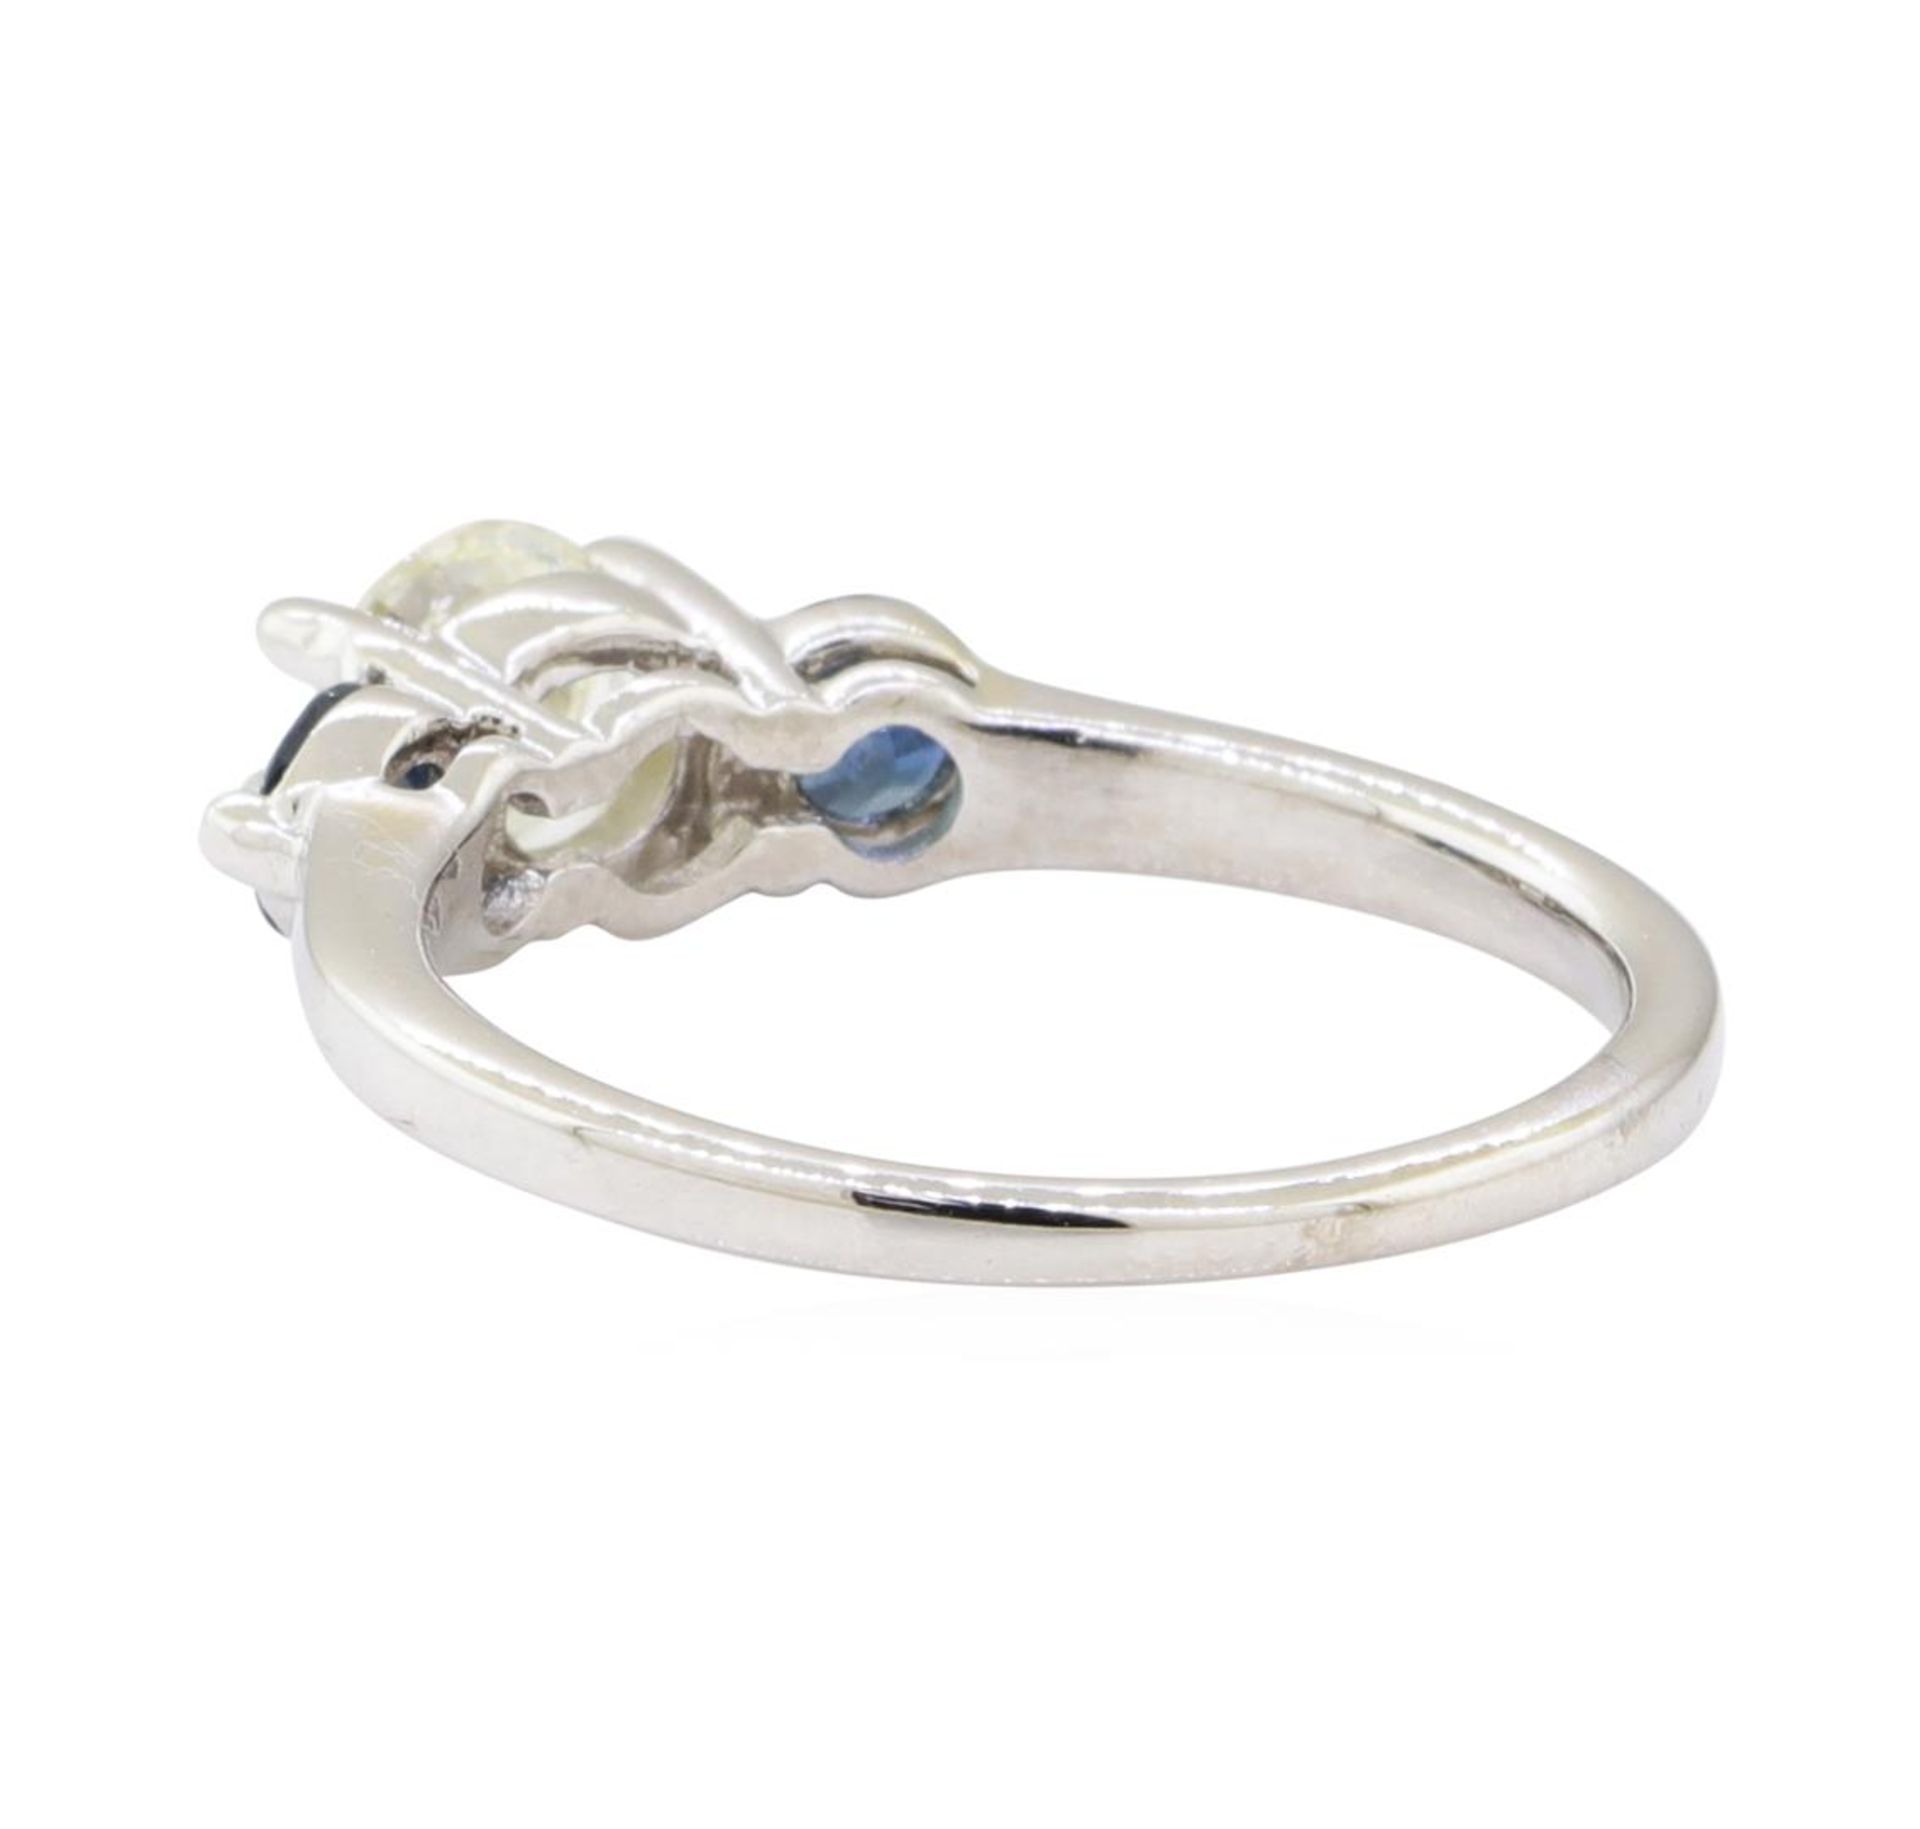 0.90 ctw Diamond and Sapphire Ring - 14KT White Gold - Image 3 of 4